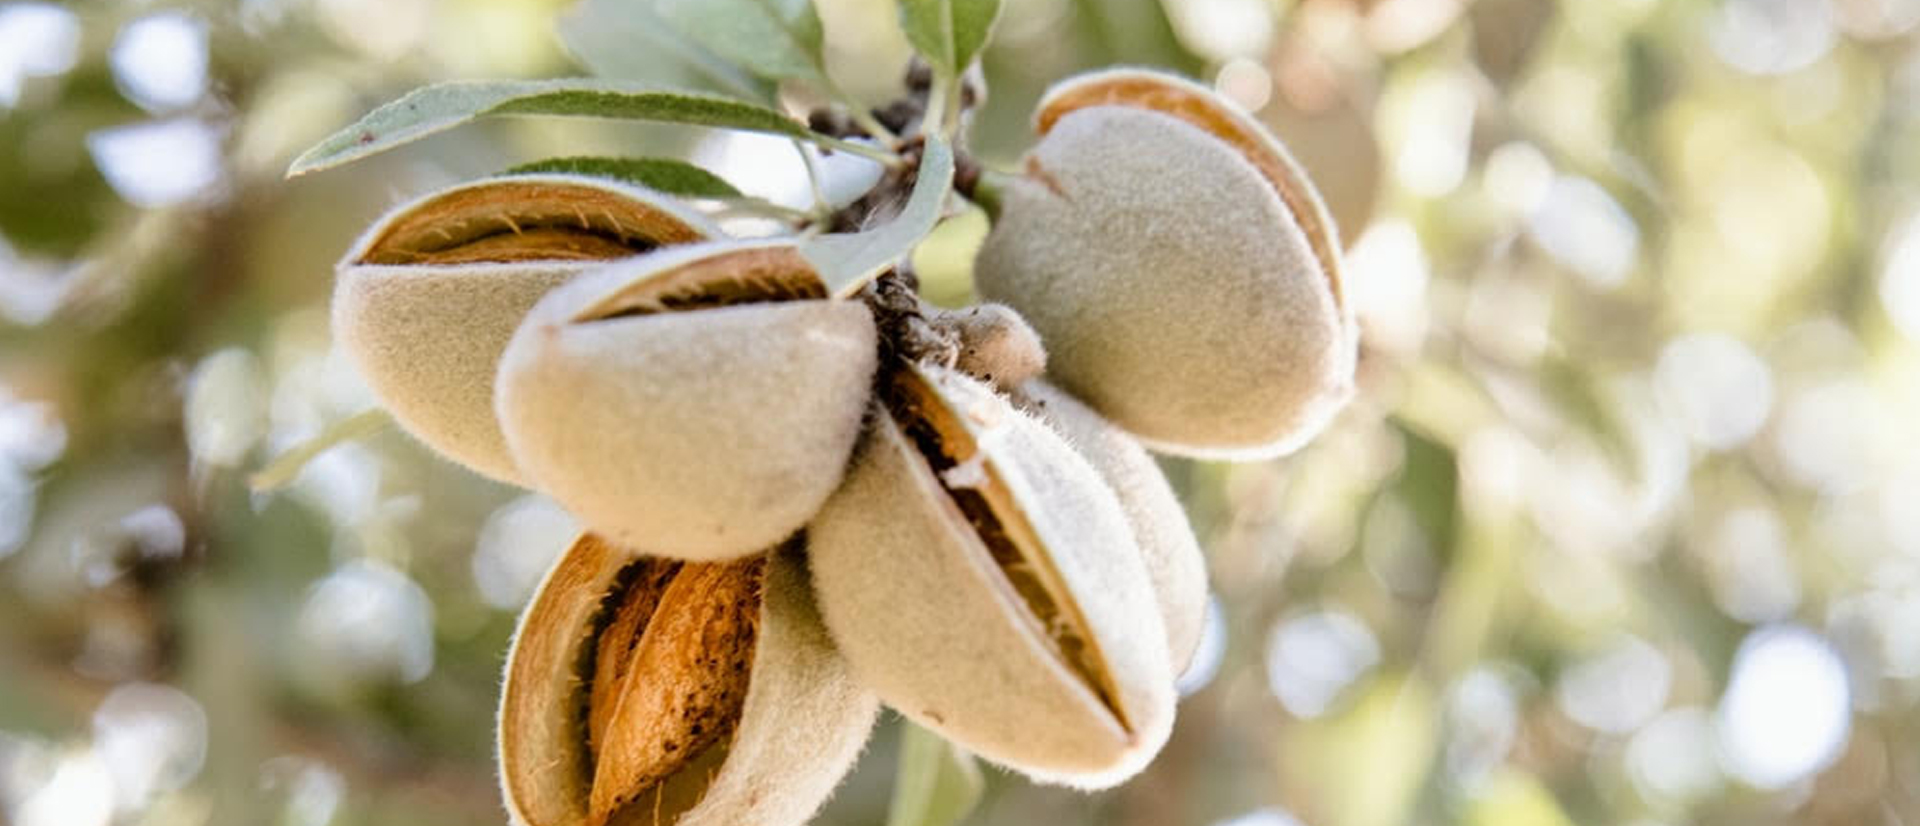 All Phase Performs in 2020 UC Riverside Almond Scab Field Trial